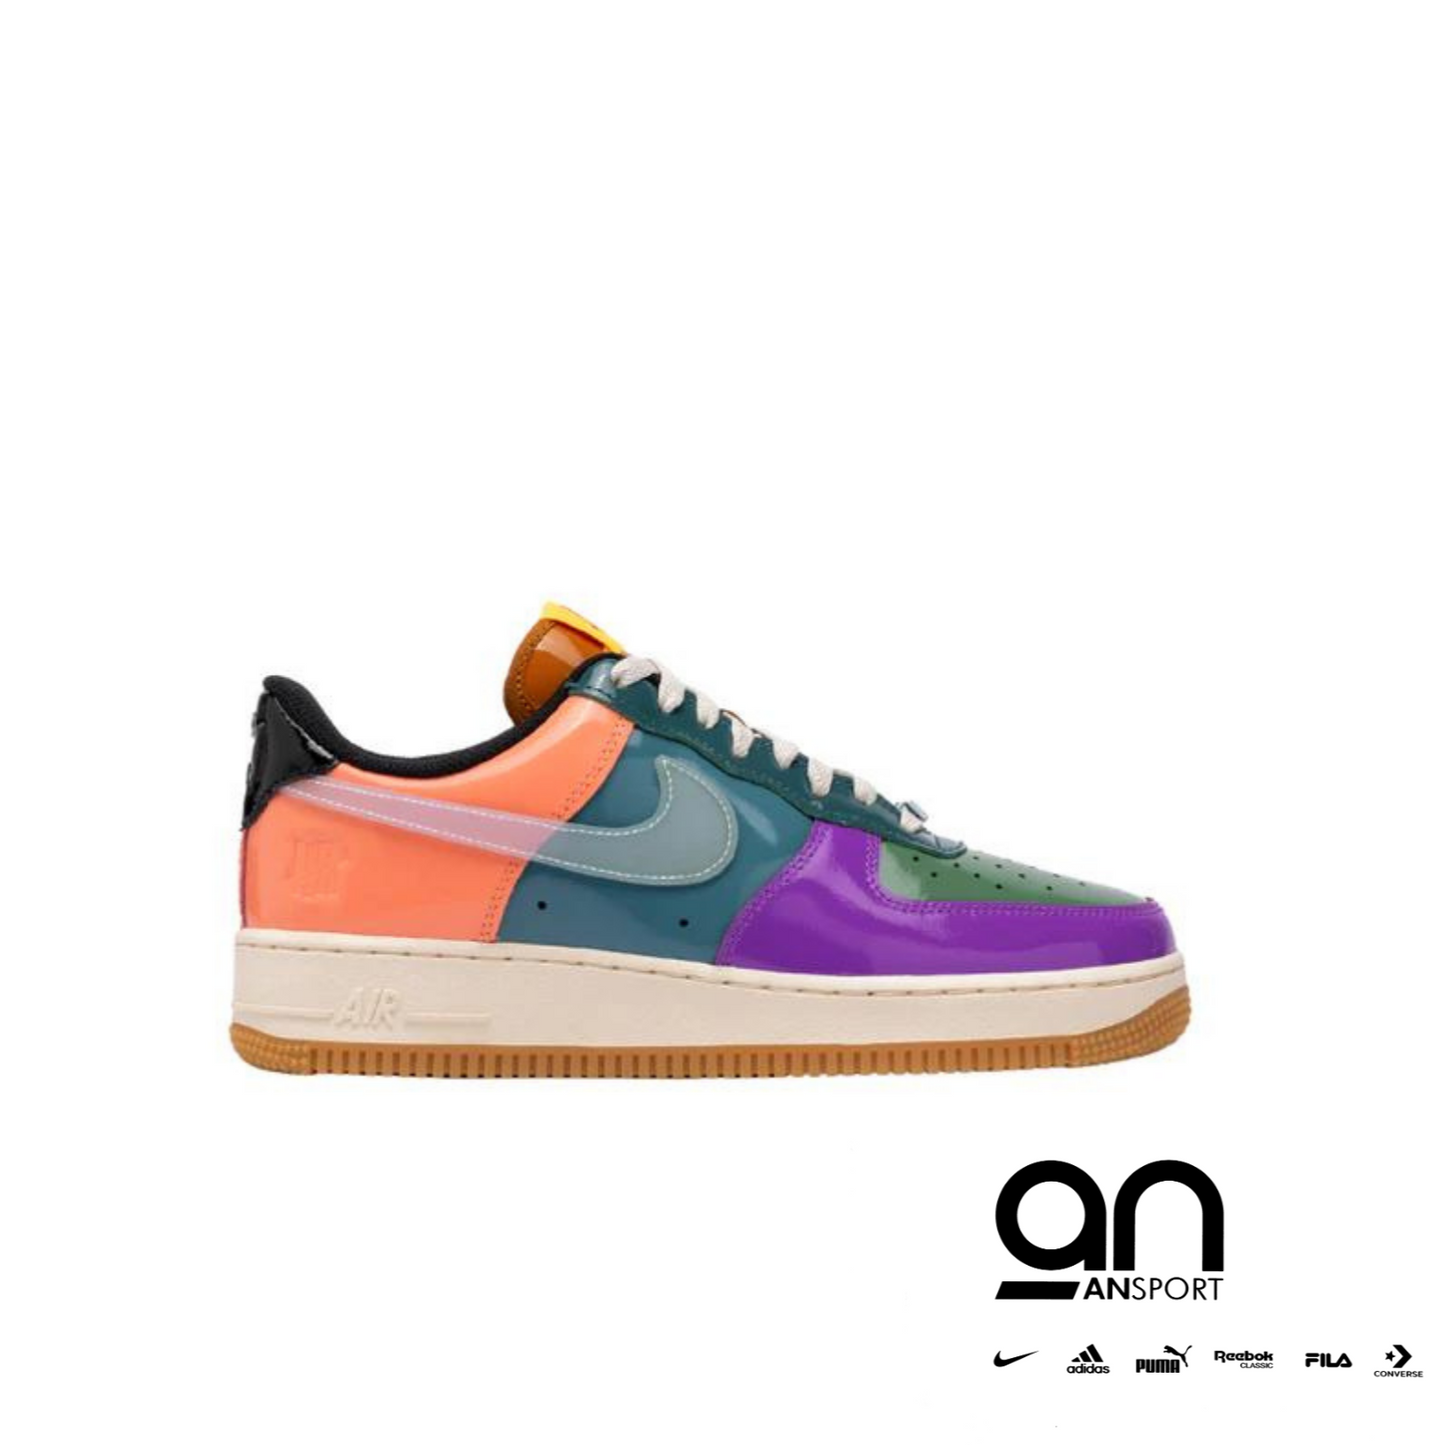 Nike Air Force 1 Low Undefeated Multi-Patent Purple Green